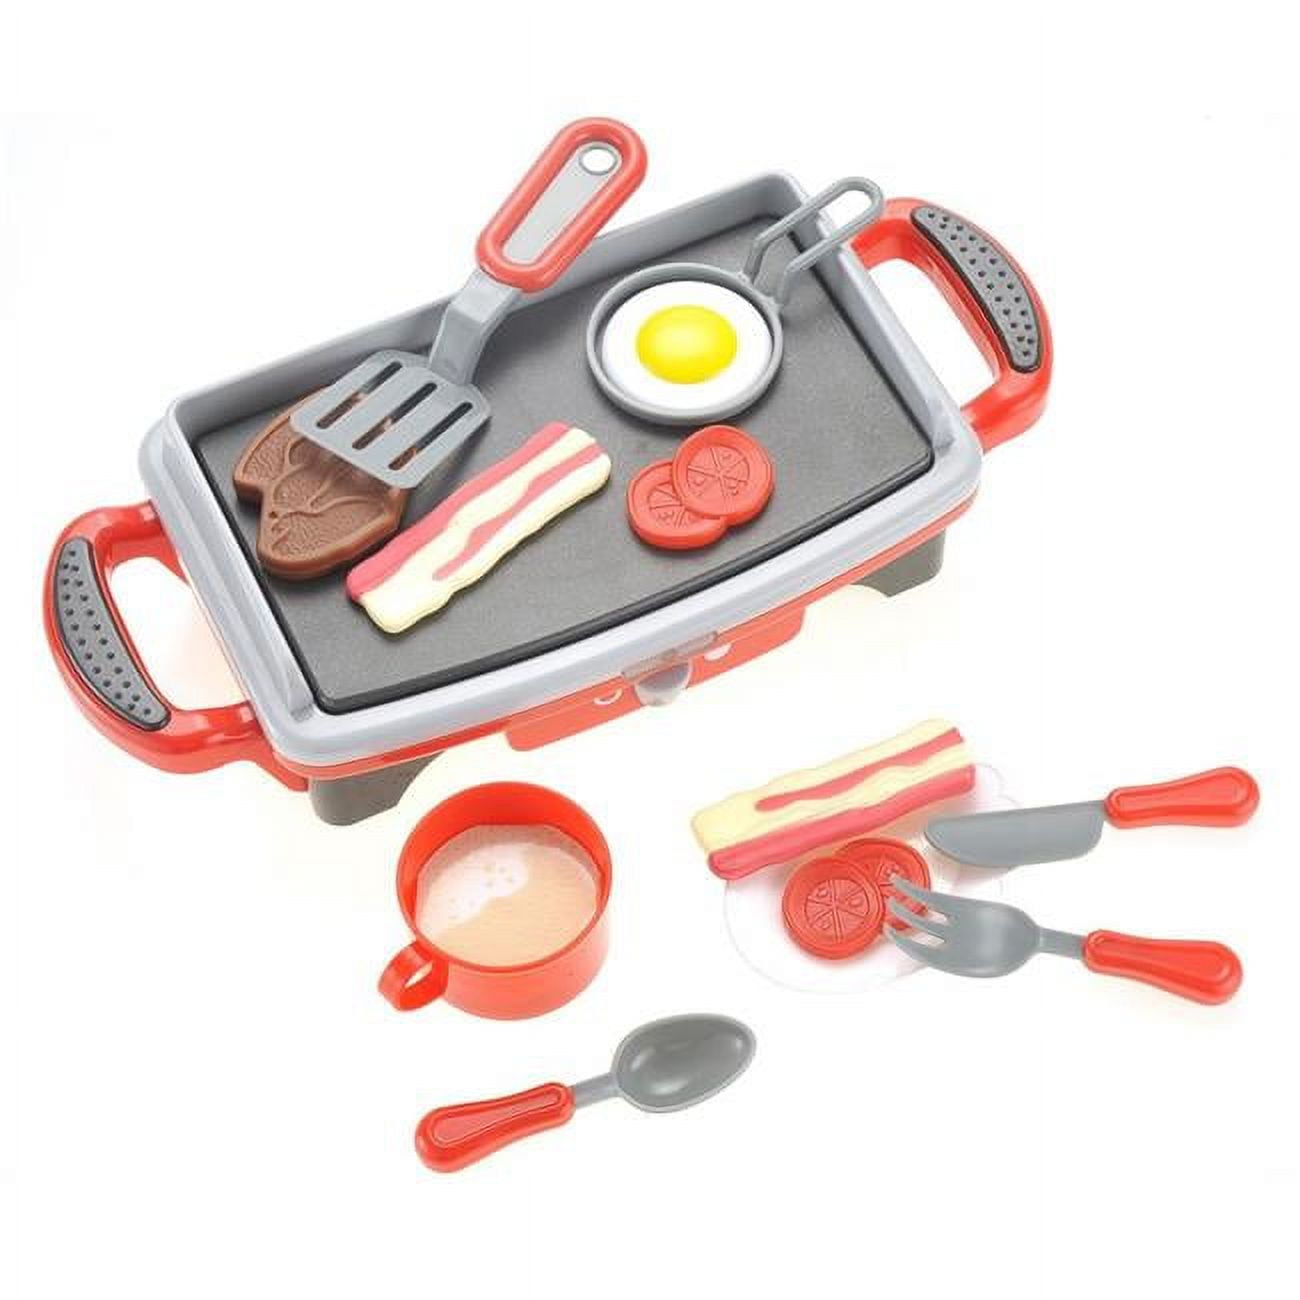 Ps58 Breakfast Griddle Electric Stove Play Food Kitchen Grill Set For Kids